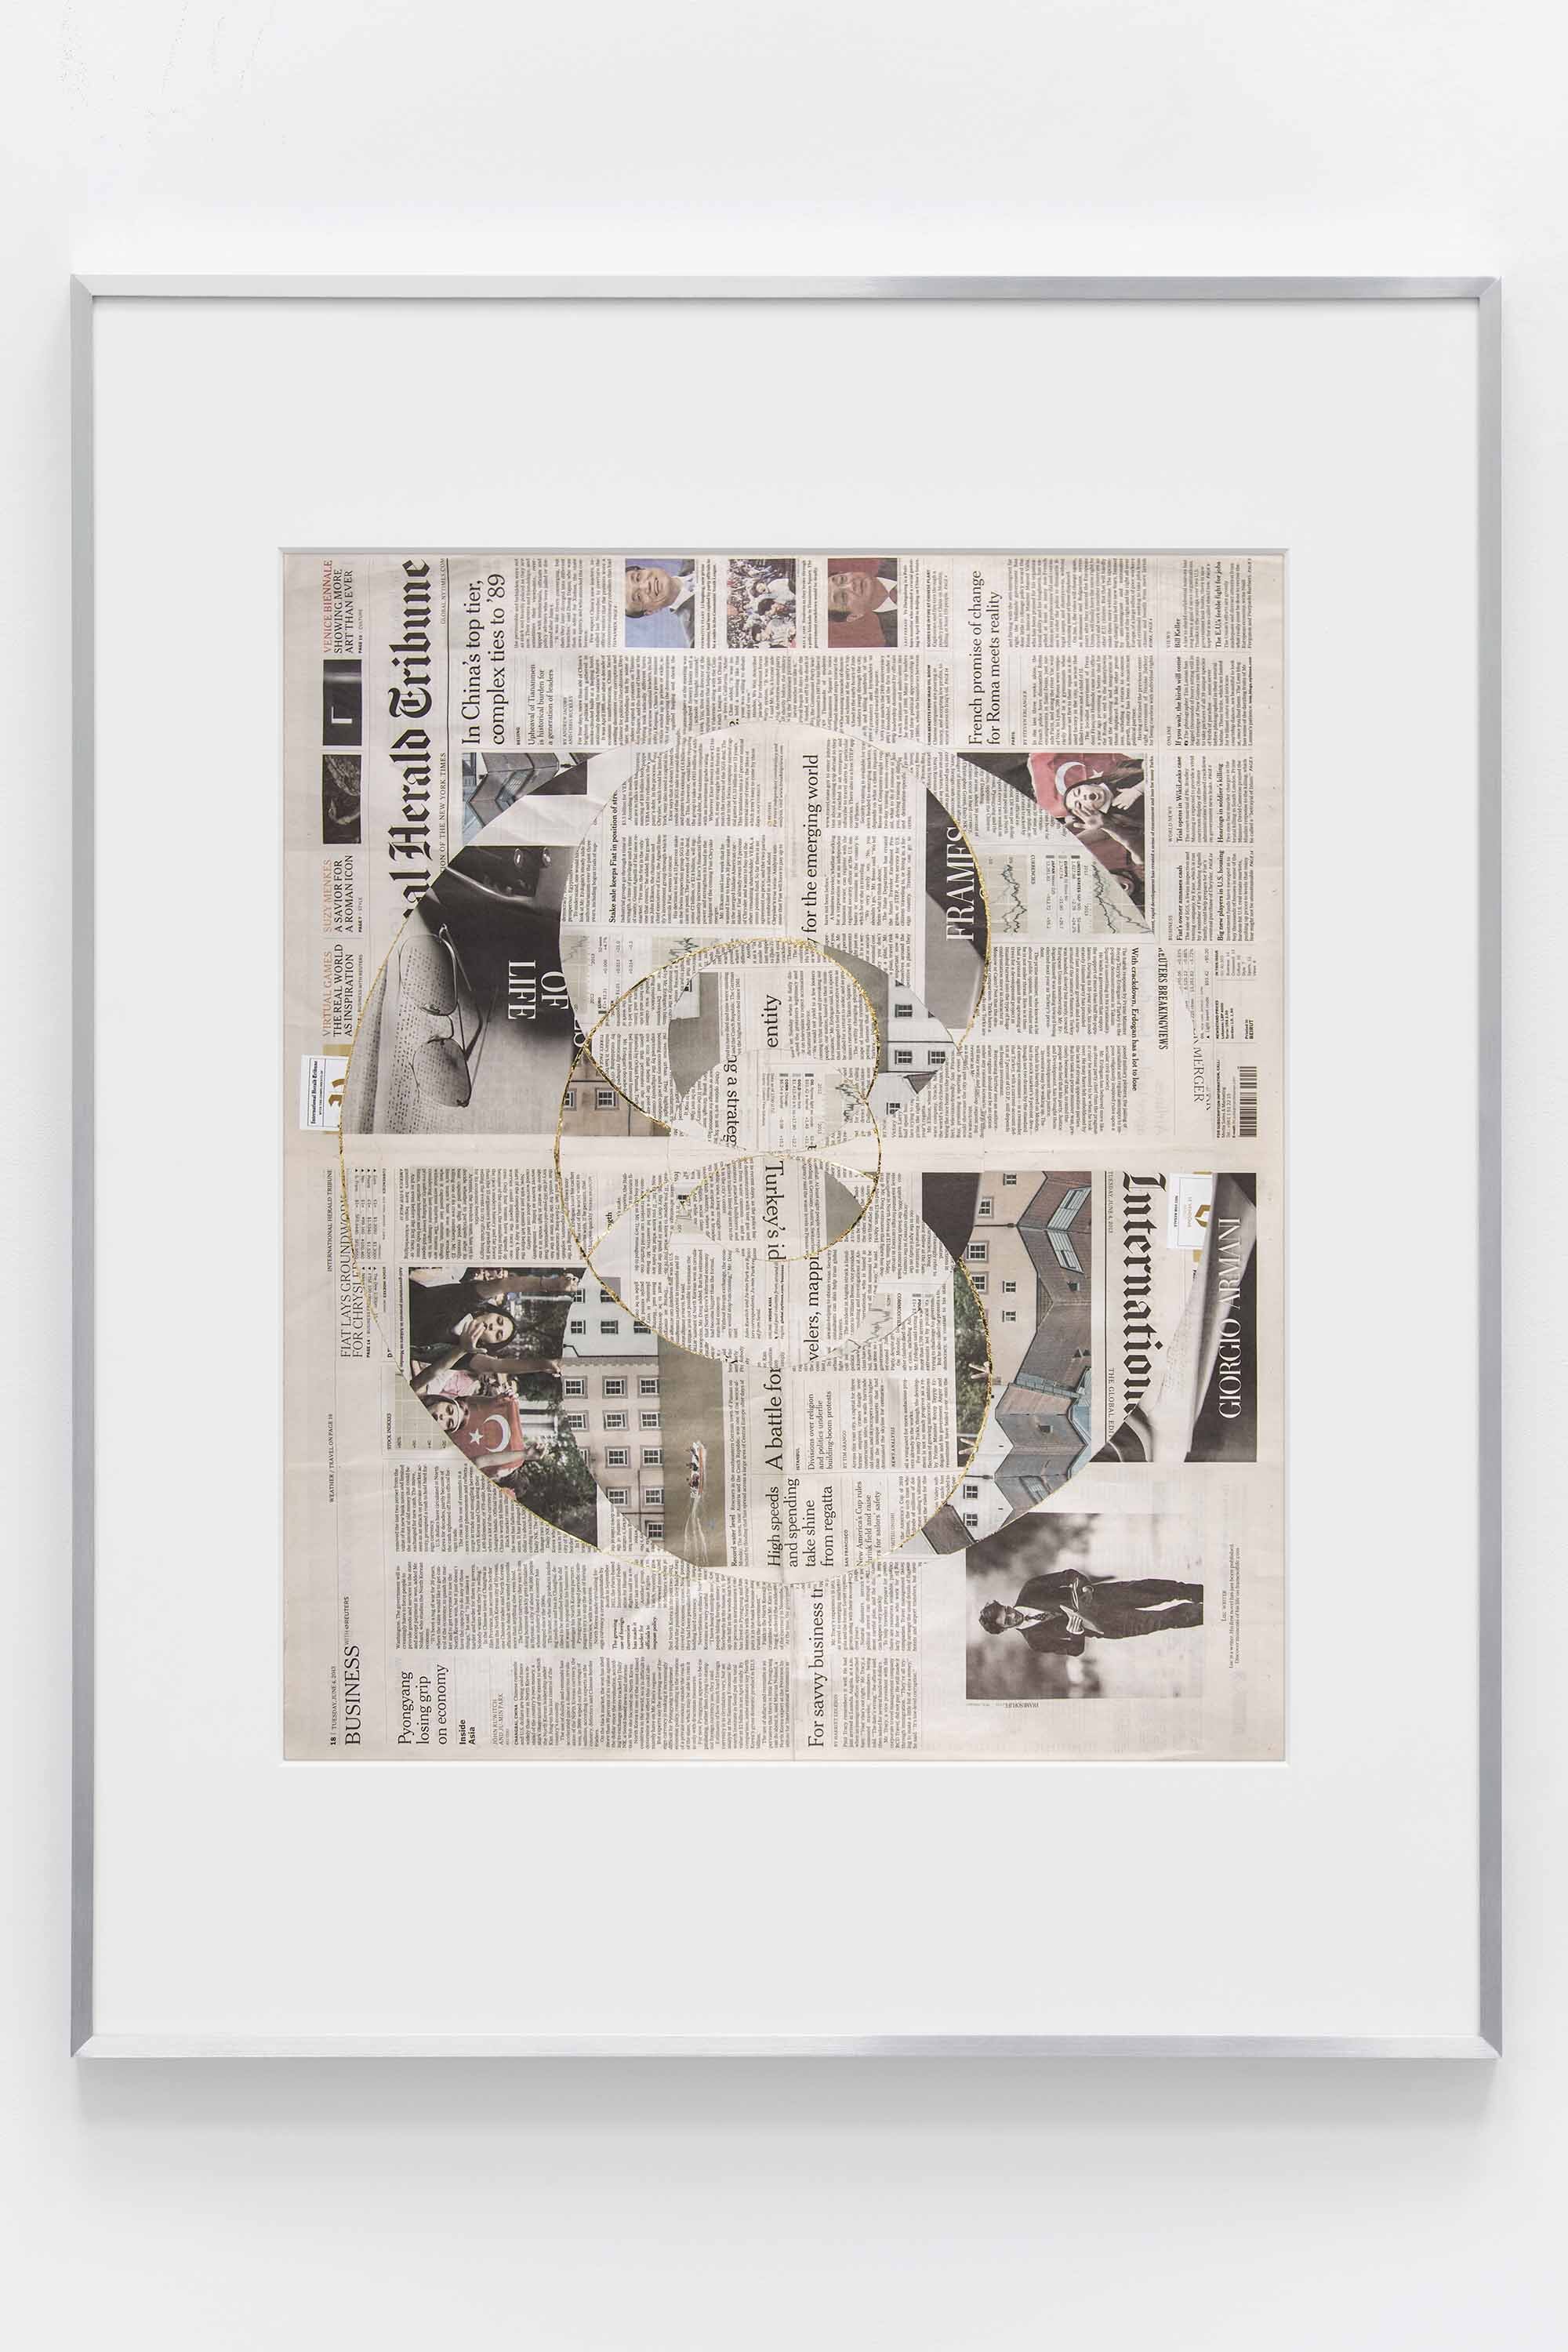   Blind Collage (Seven 180º Rotations, International Herald Tribune: Beirut, Lebanon, Tuesday, June 4, 2013)   2021  Newspaper, tape, and 22 karat gold leaf  39 1/8 x 31 1/4 inches   Blind Collages, 2017–   Exhibition:   Foreign Correspondence, 2021 